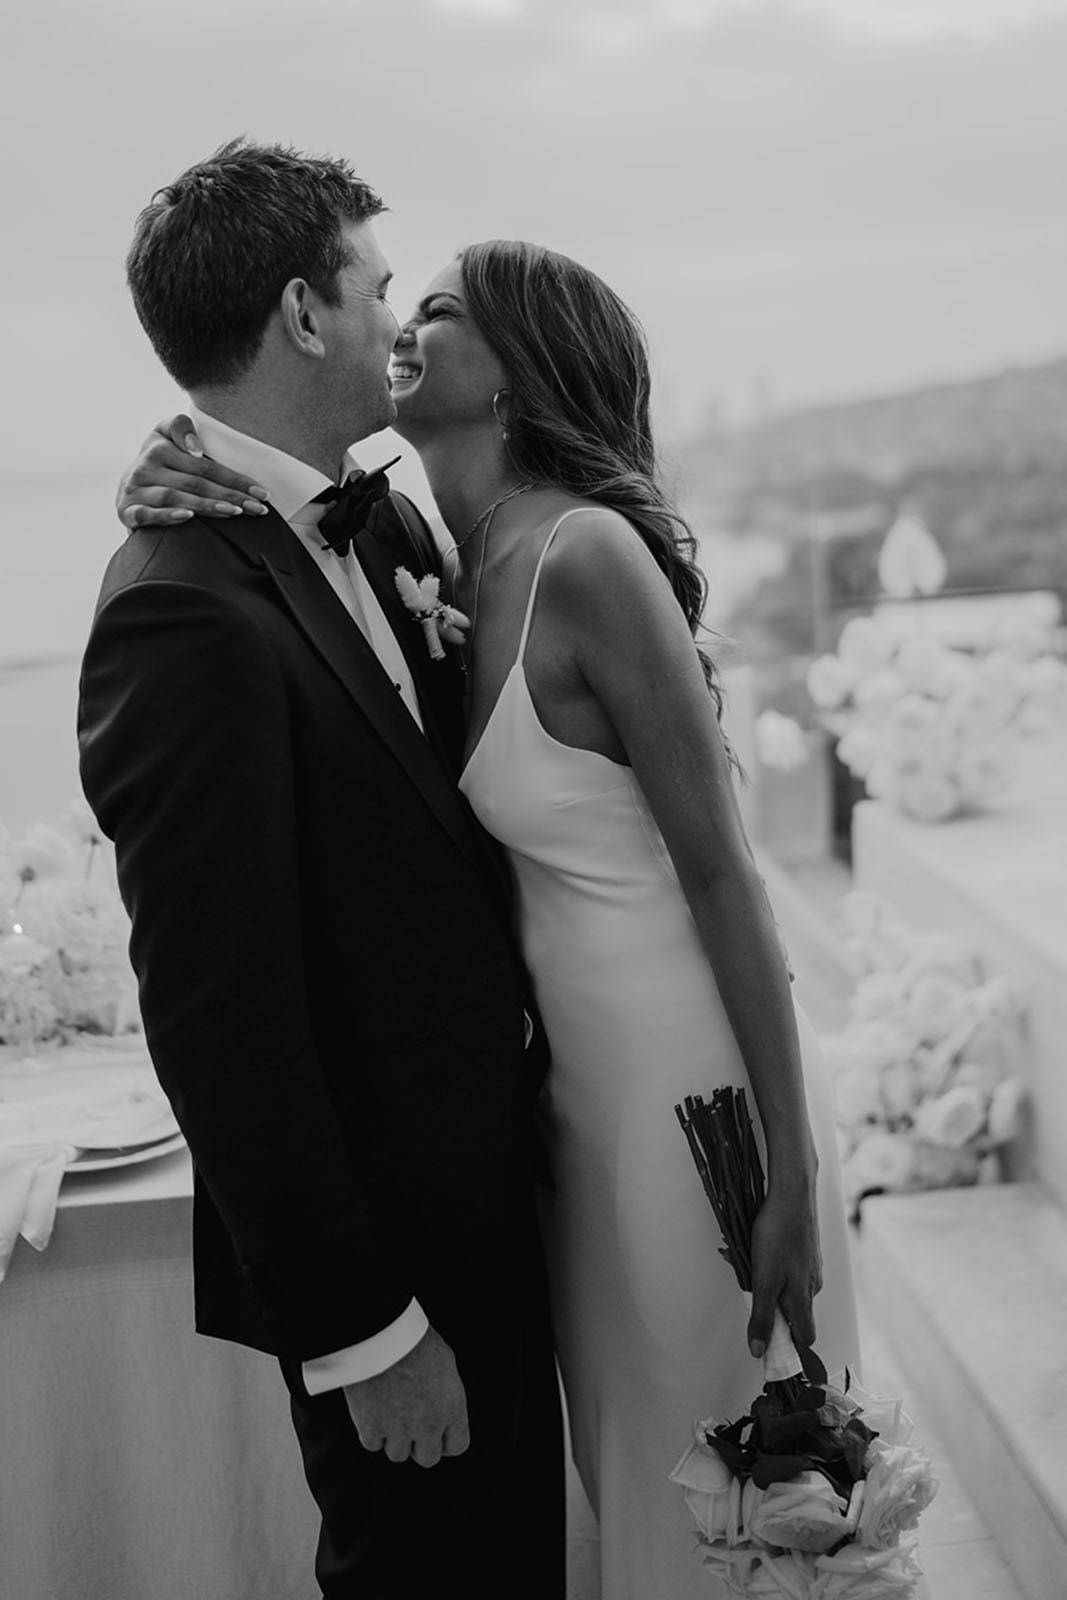 The bride and groom are captured in a moment of pure joy, sharing a heartfelt laugh together